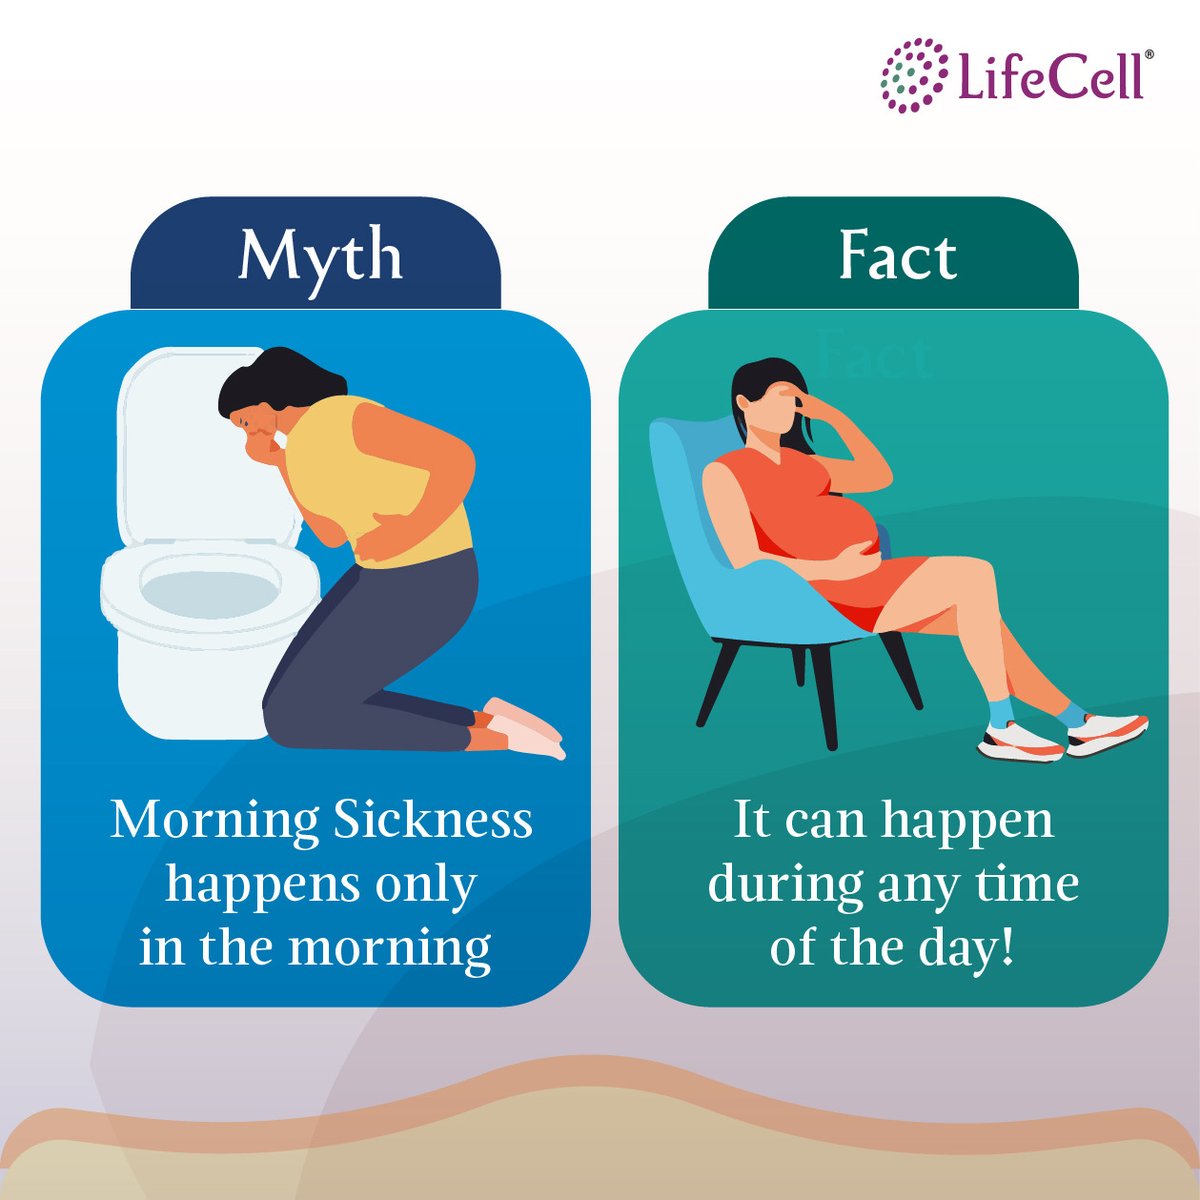 #Nausea and #vomiting that happens during #pregnancy is widely known as #morningsickness. It affects more than half of pregnant women, especially during the first trimester. And, here's the #fact

#lifecellin #pregnancysickness #expectingmom